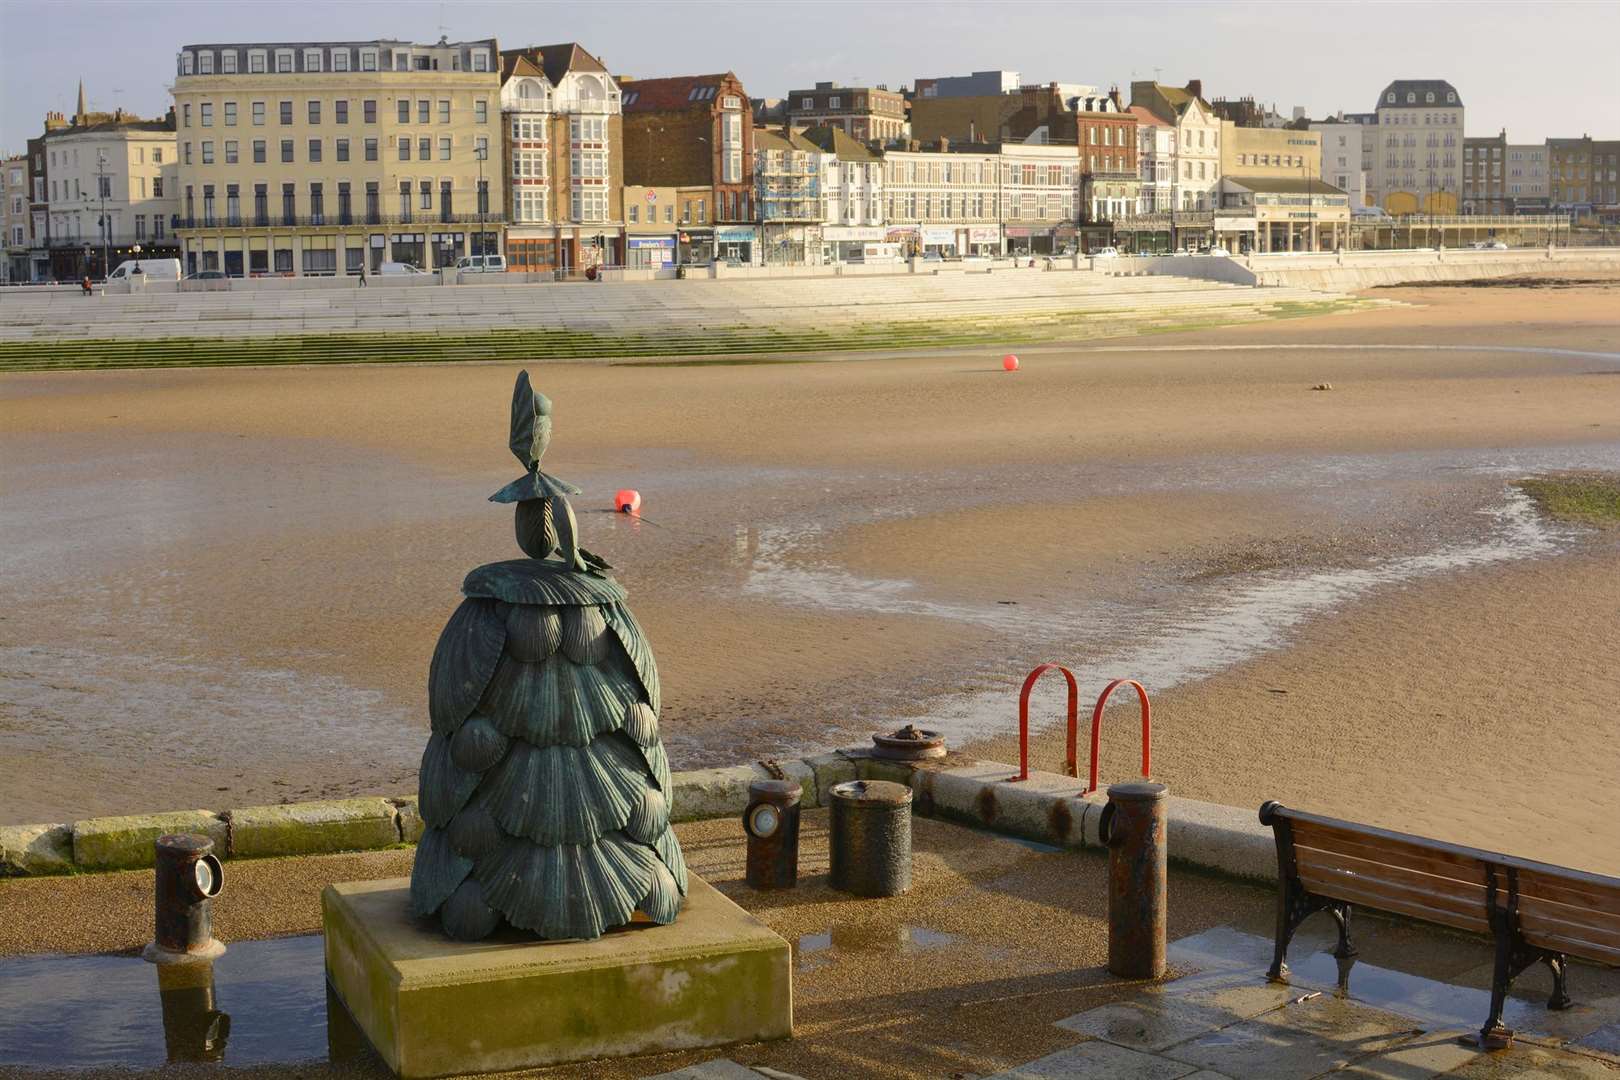 Tourism is said to be worth £319m to the Thanet economy